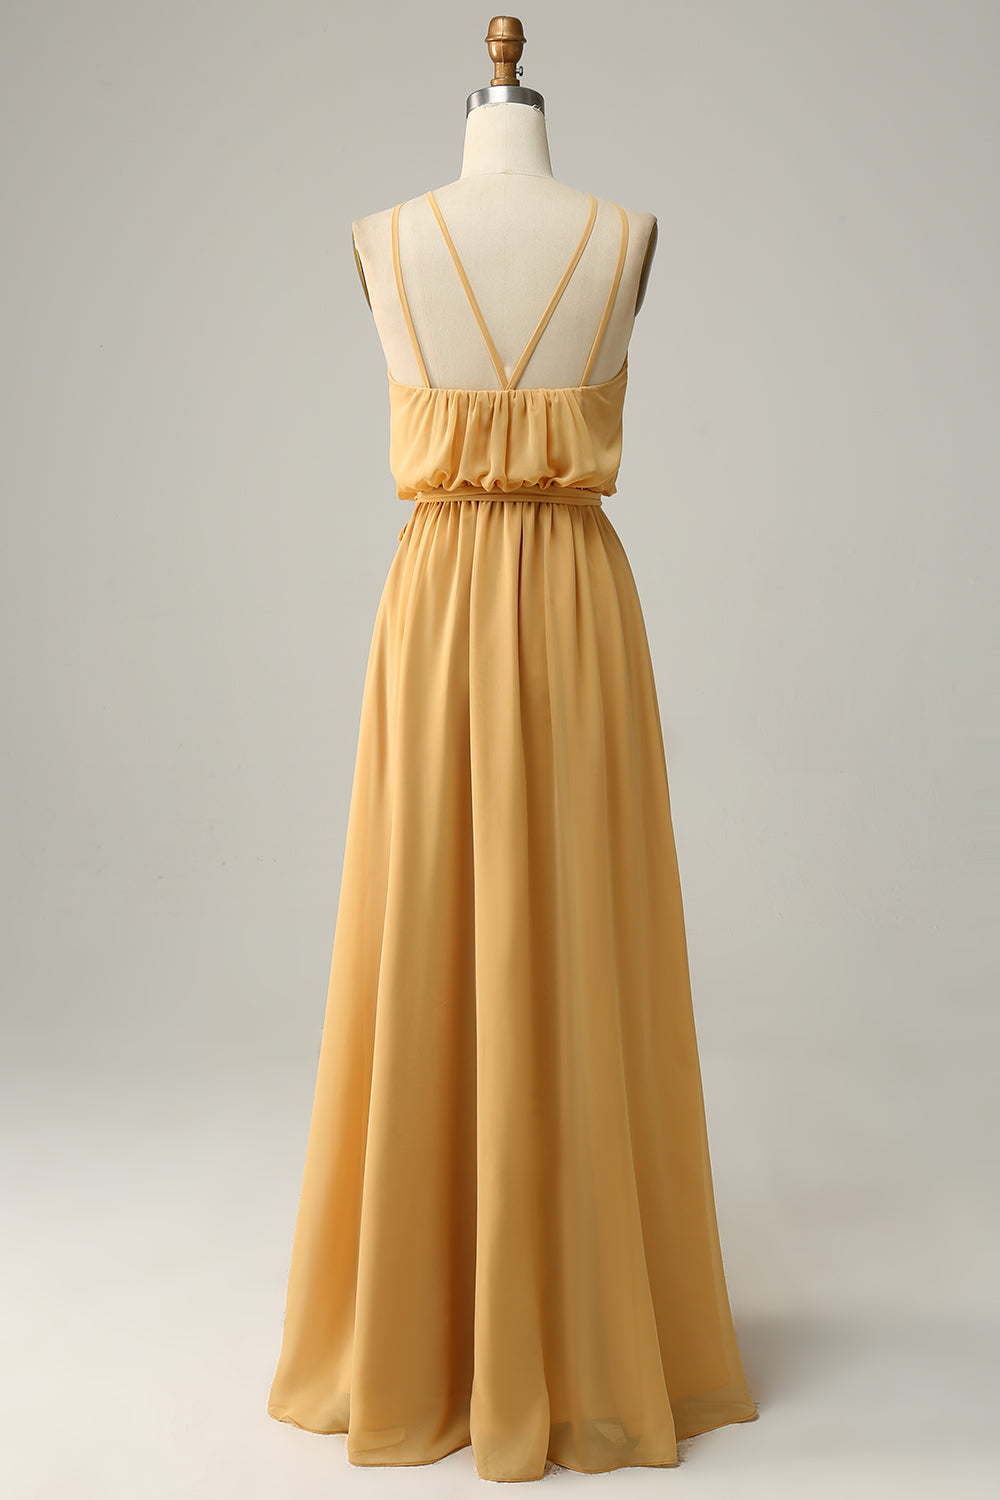 Yellow A Line Halter Long Bridesmaid Dress with Bowknot